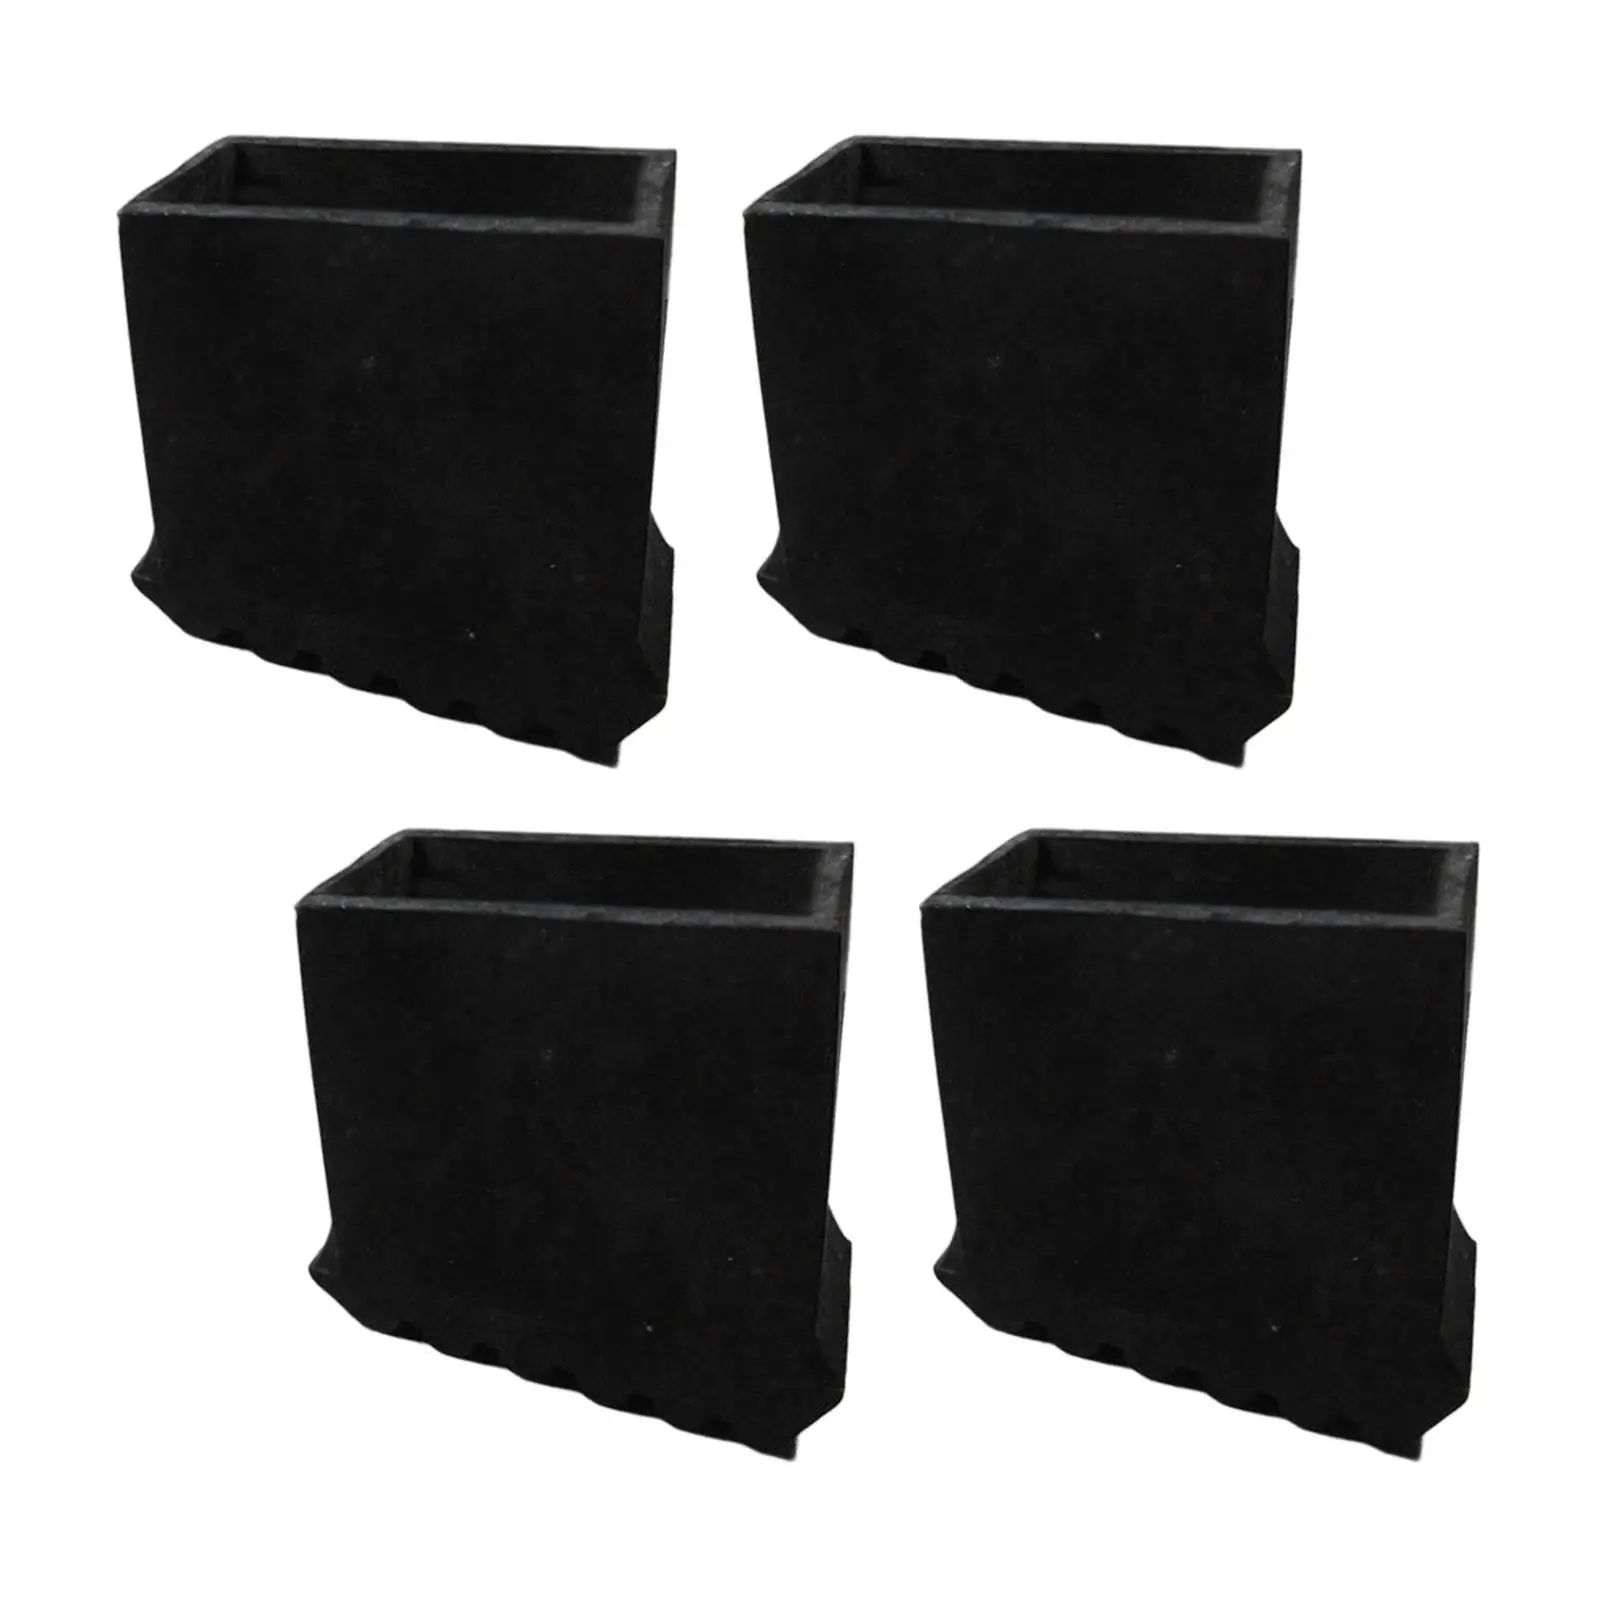 4Pcs Ladder Feet Pads Suitable for Most Ladders Cushion Universal Wear Resistance Protects Your Floor Ladder Non Slip Feet Mats